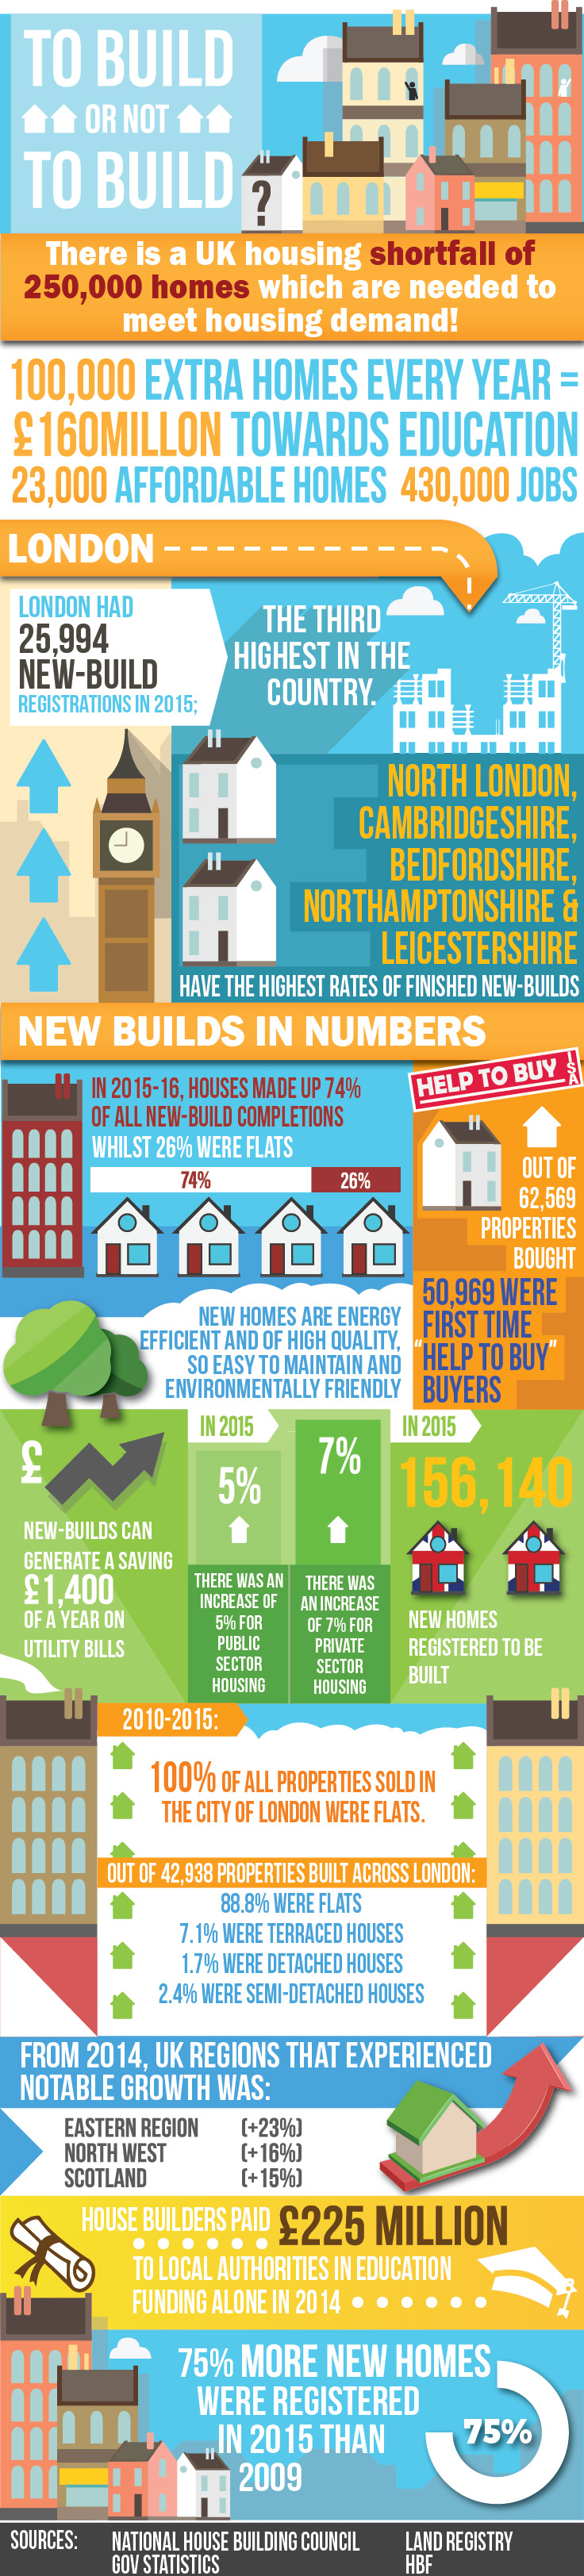 New-builds-infographic-final